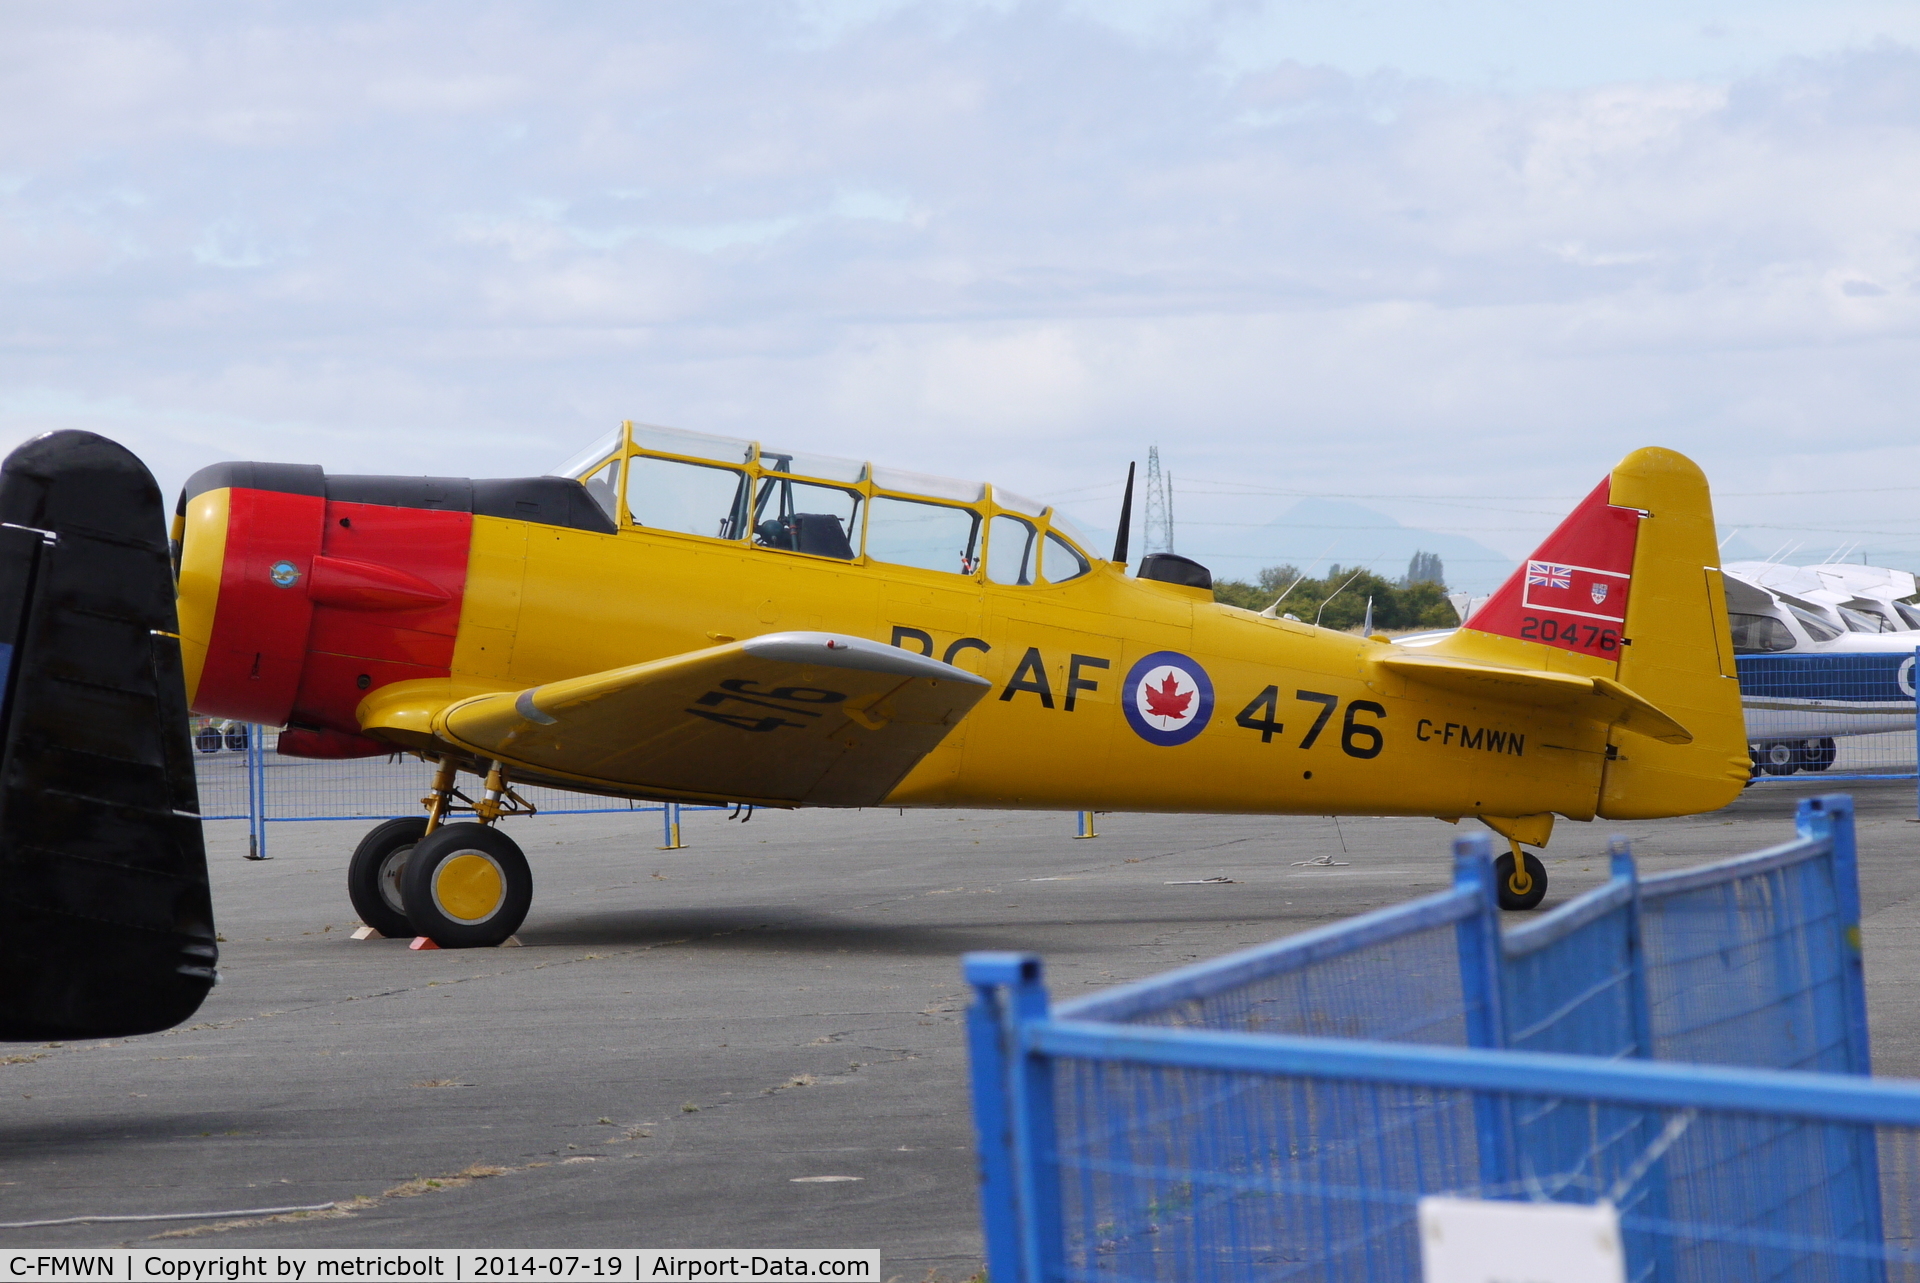 C-FMWN, 1953 Canadian Car & Foundry T-6 Harvard Mk.4 C/N CCF4-267, At the Boundary Bay Airshow